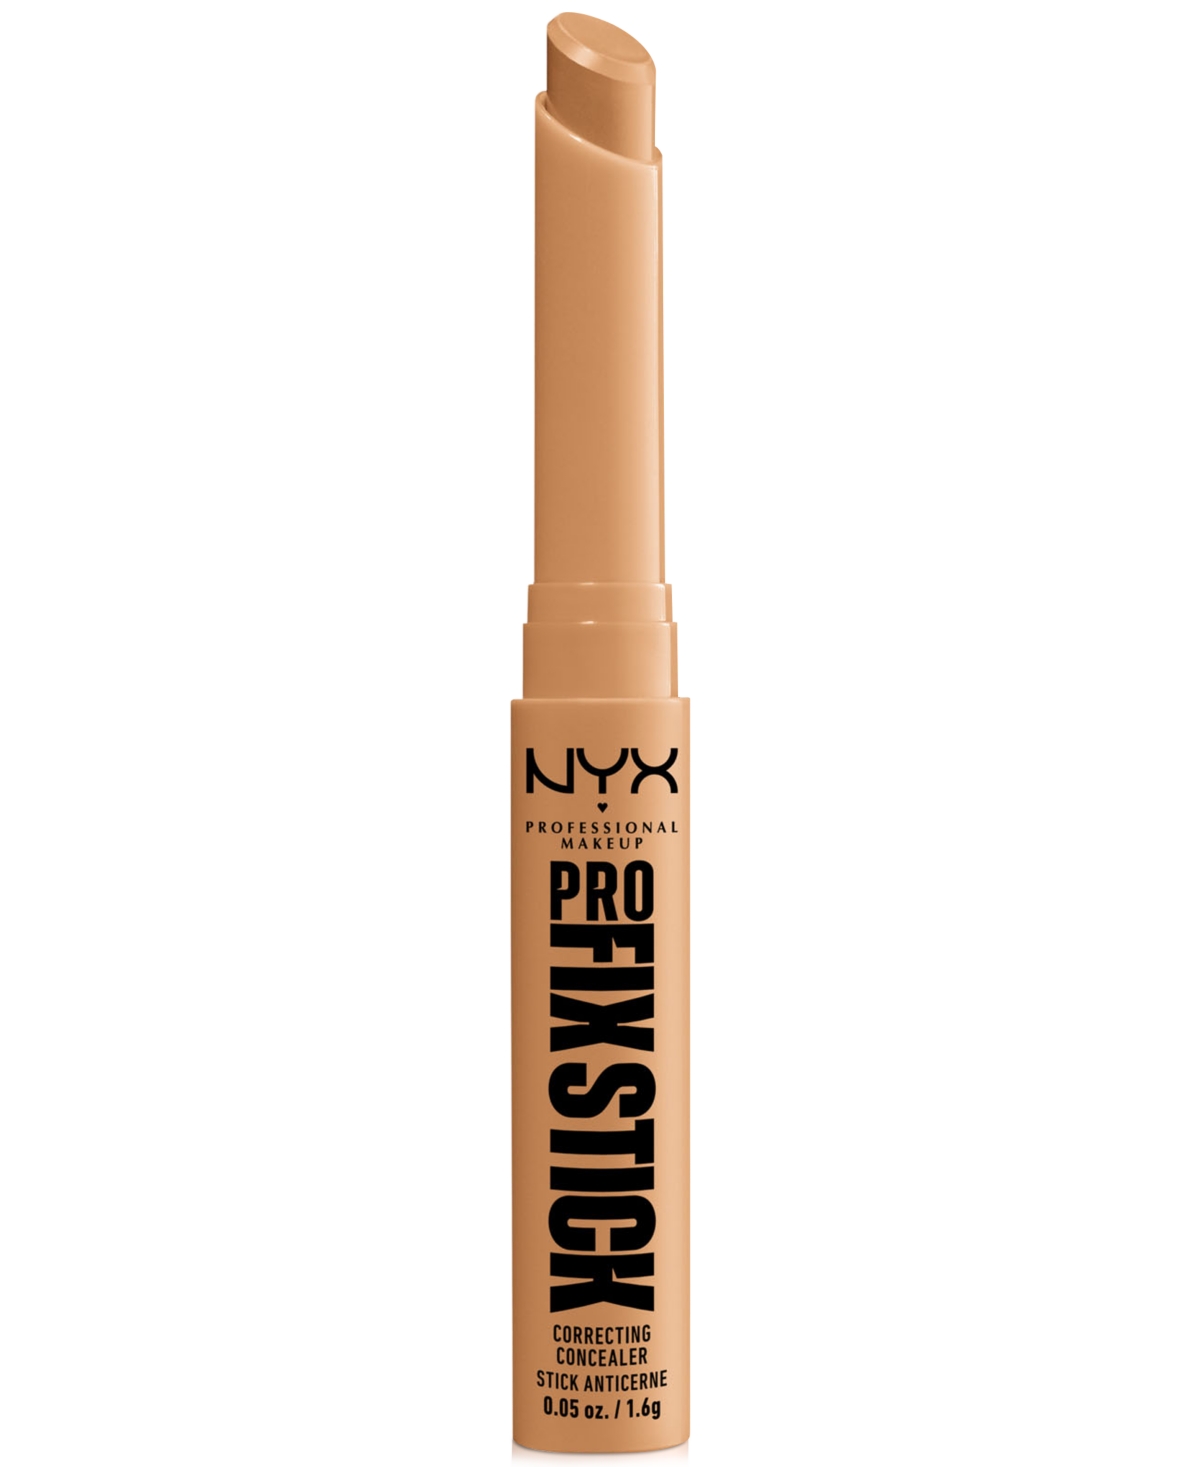 Nyx Professional Makeup Pro Fix Stick Correcting Concealer, 0.05 Oz. In Golden